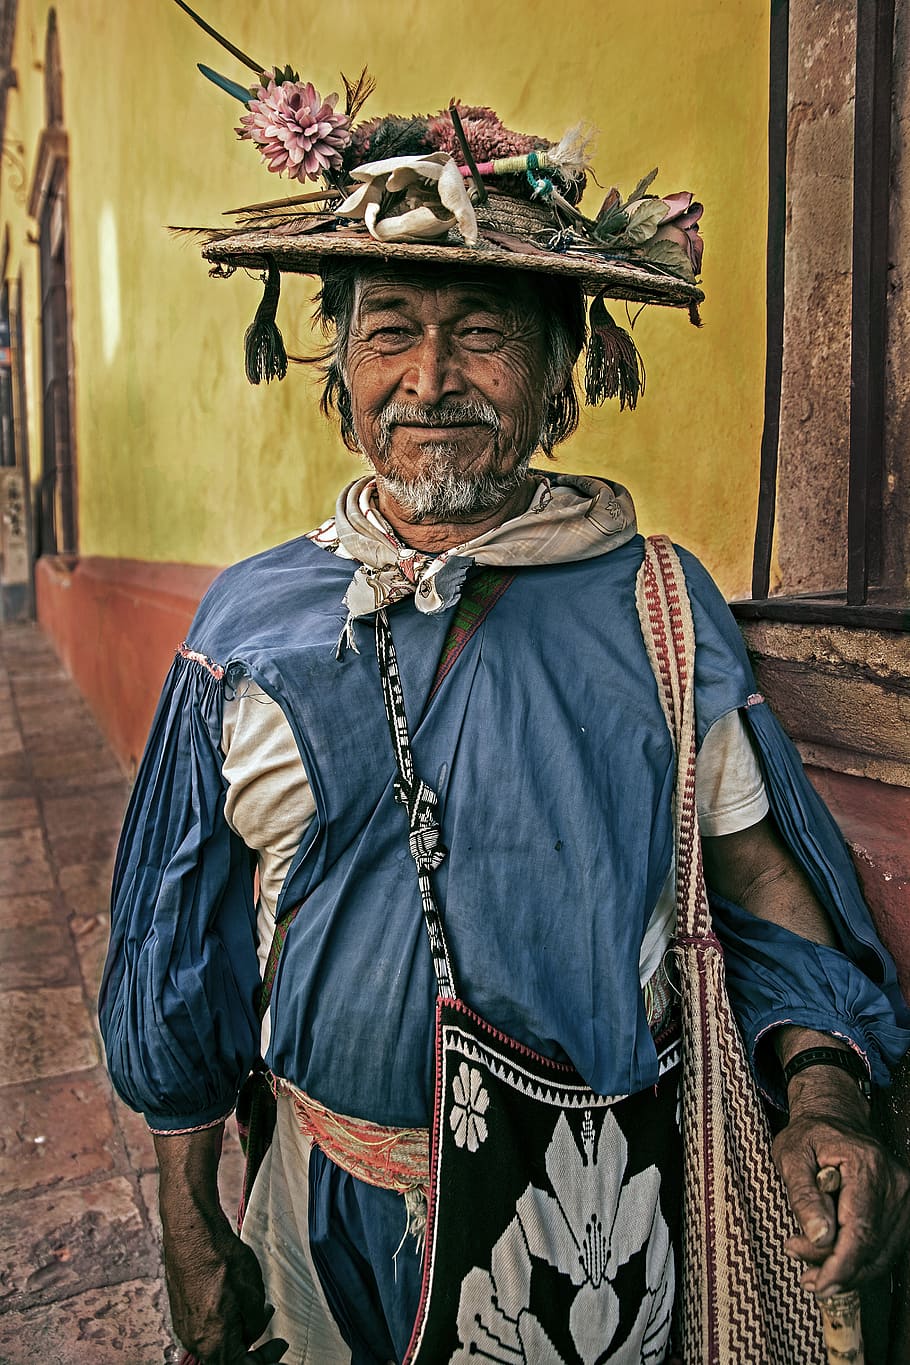 mexico, travel, mexican, scenic, inhabitants, human, old man tradition, culture, indian, colorful